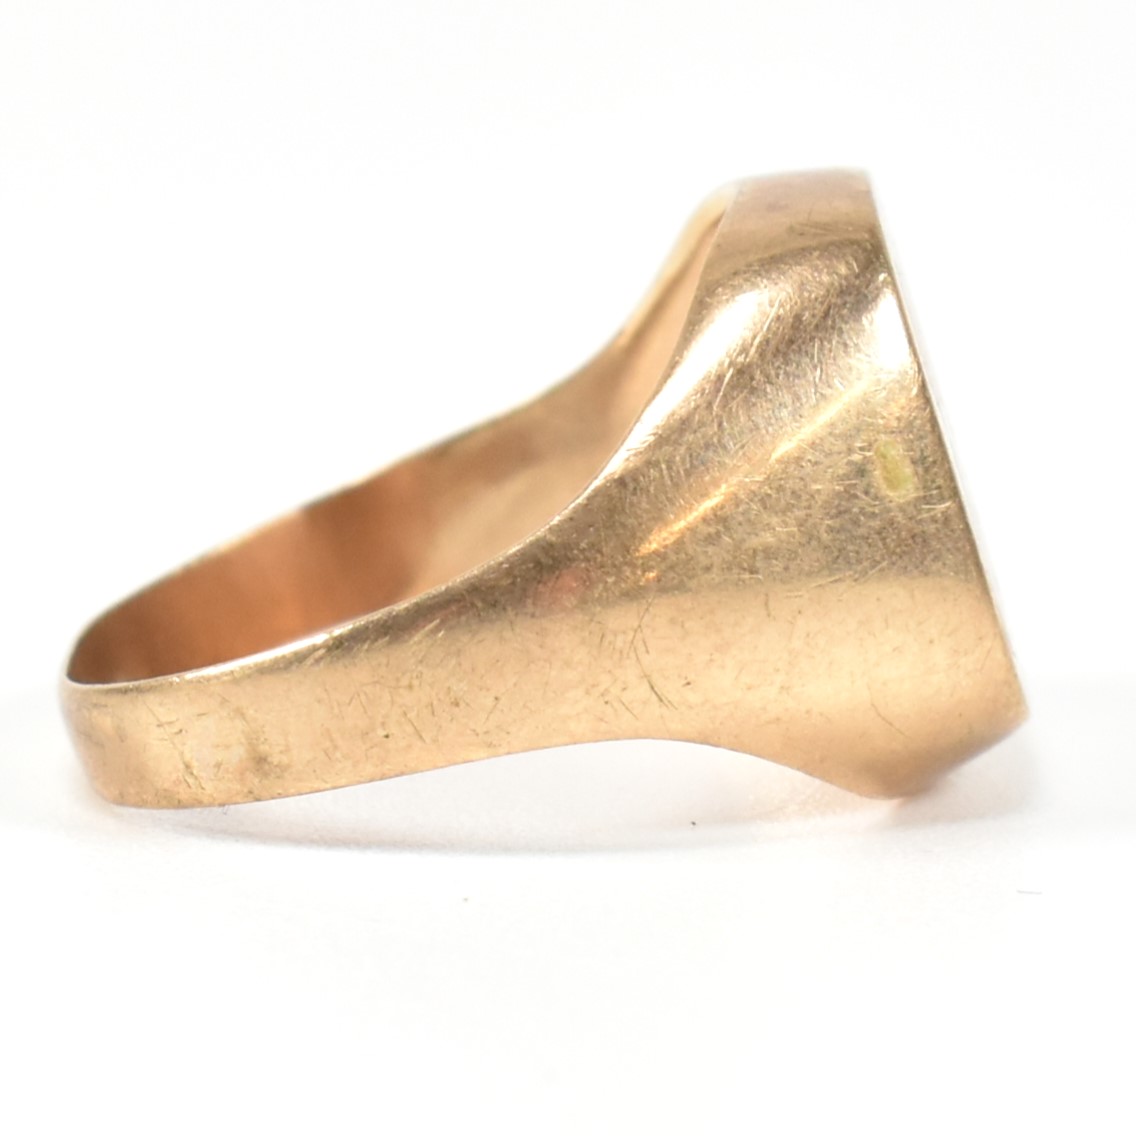 HALLMARKED 9CT GOLD ENGRAVED SIGNET RING - Image 6 of 9